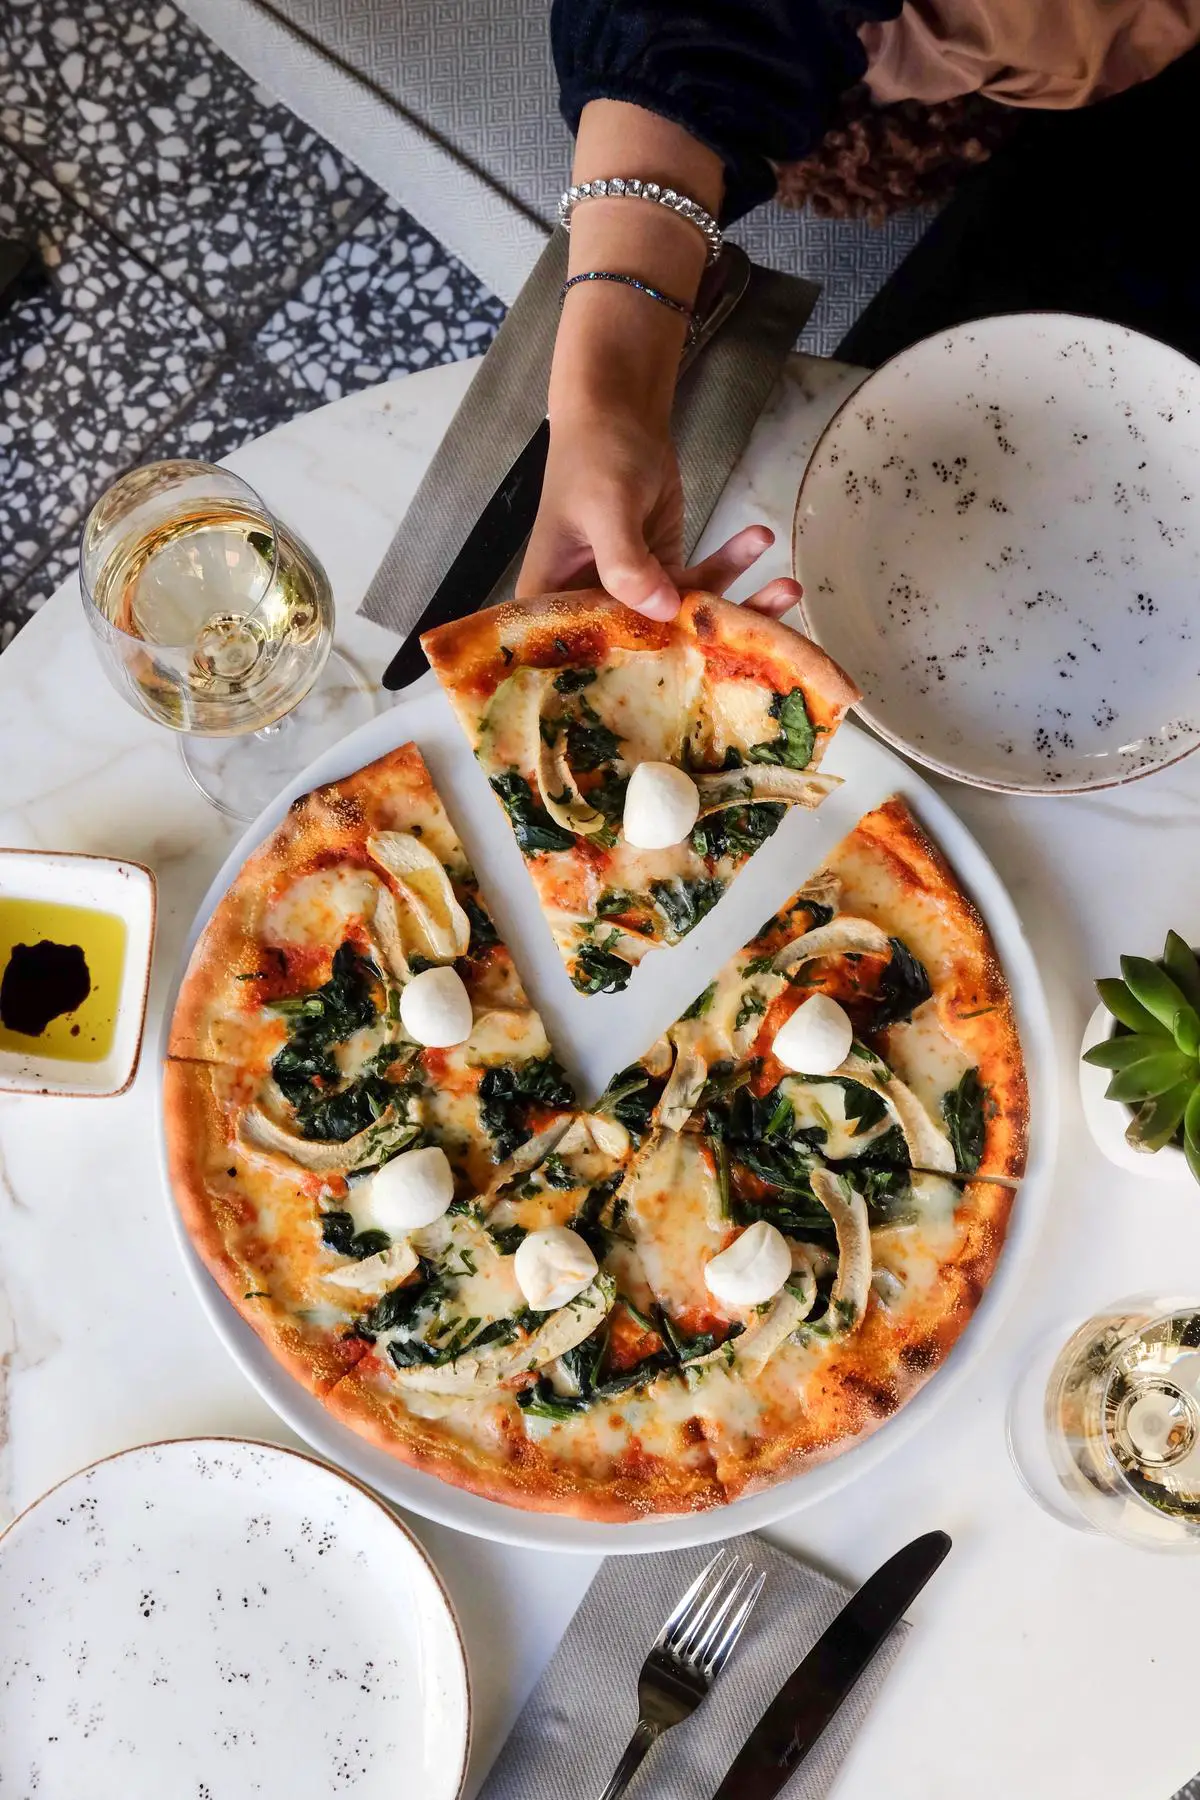 Image of a delicious gluten-free pizza with toppings on a wooden table